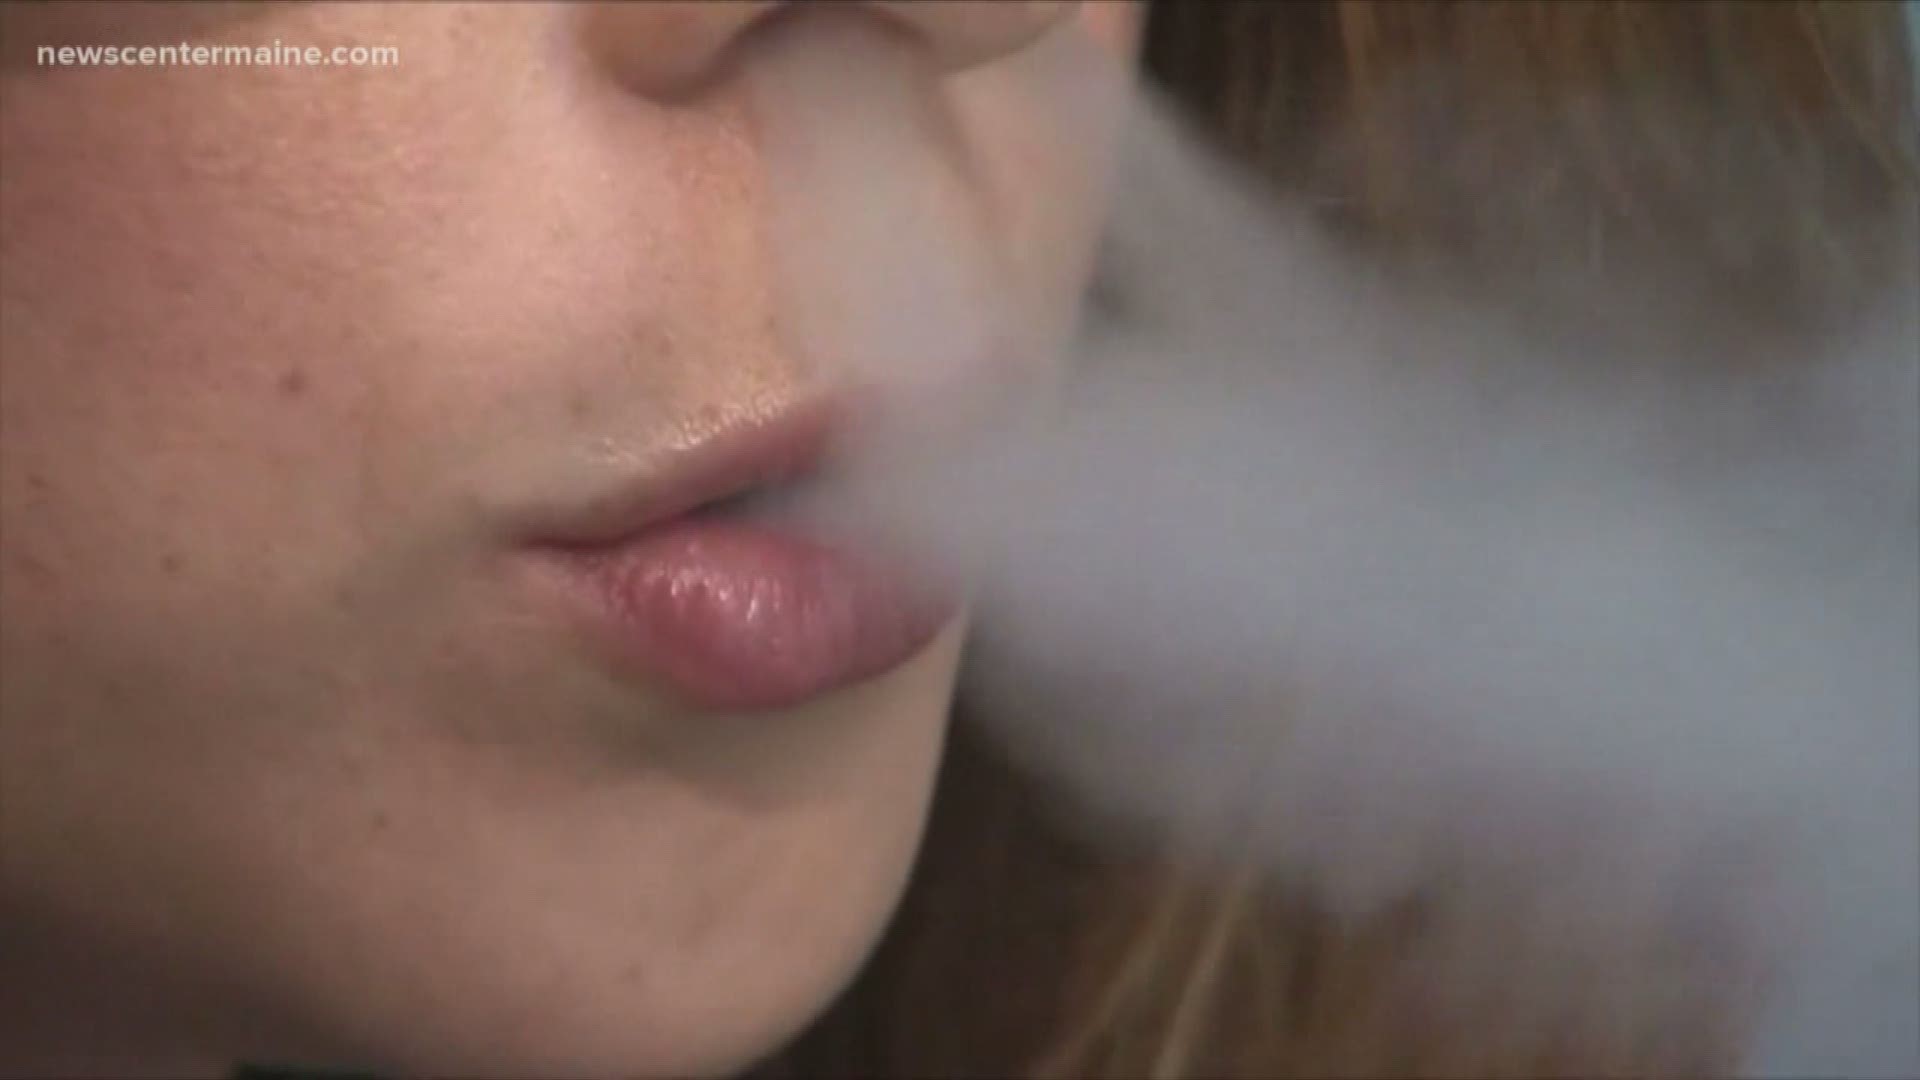 Maine lawmakers trying to ban e-cigarettes